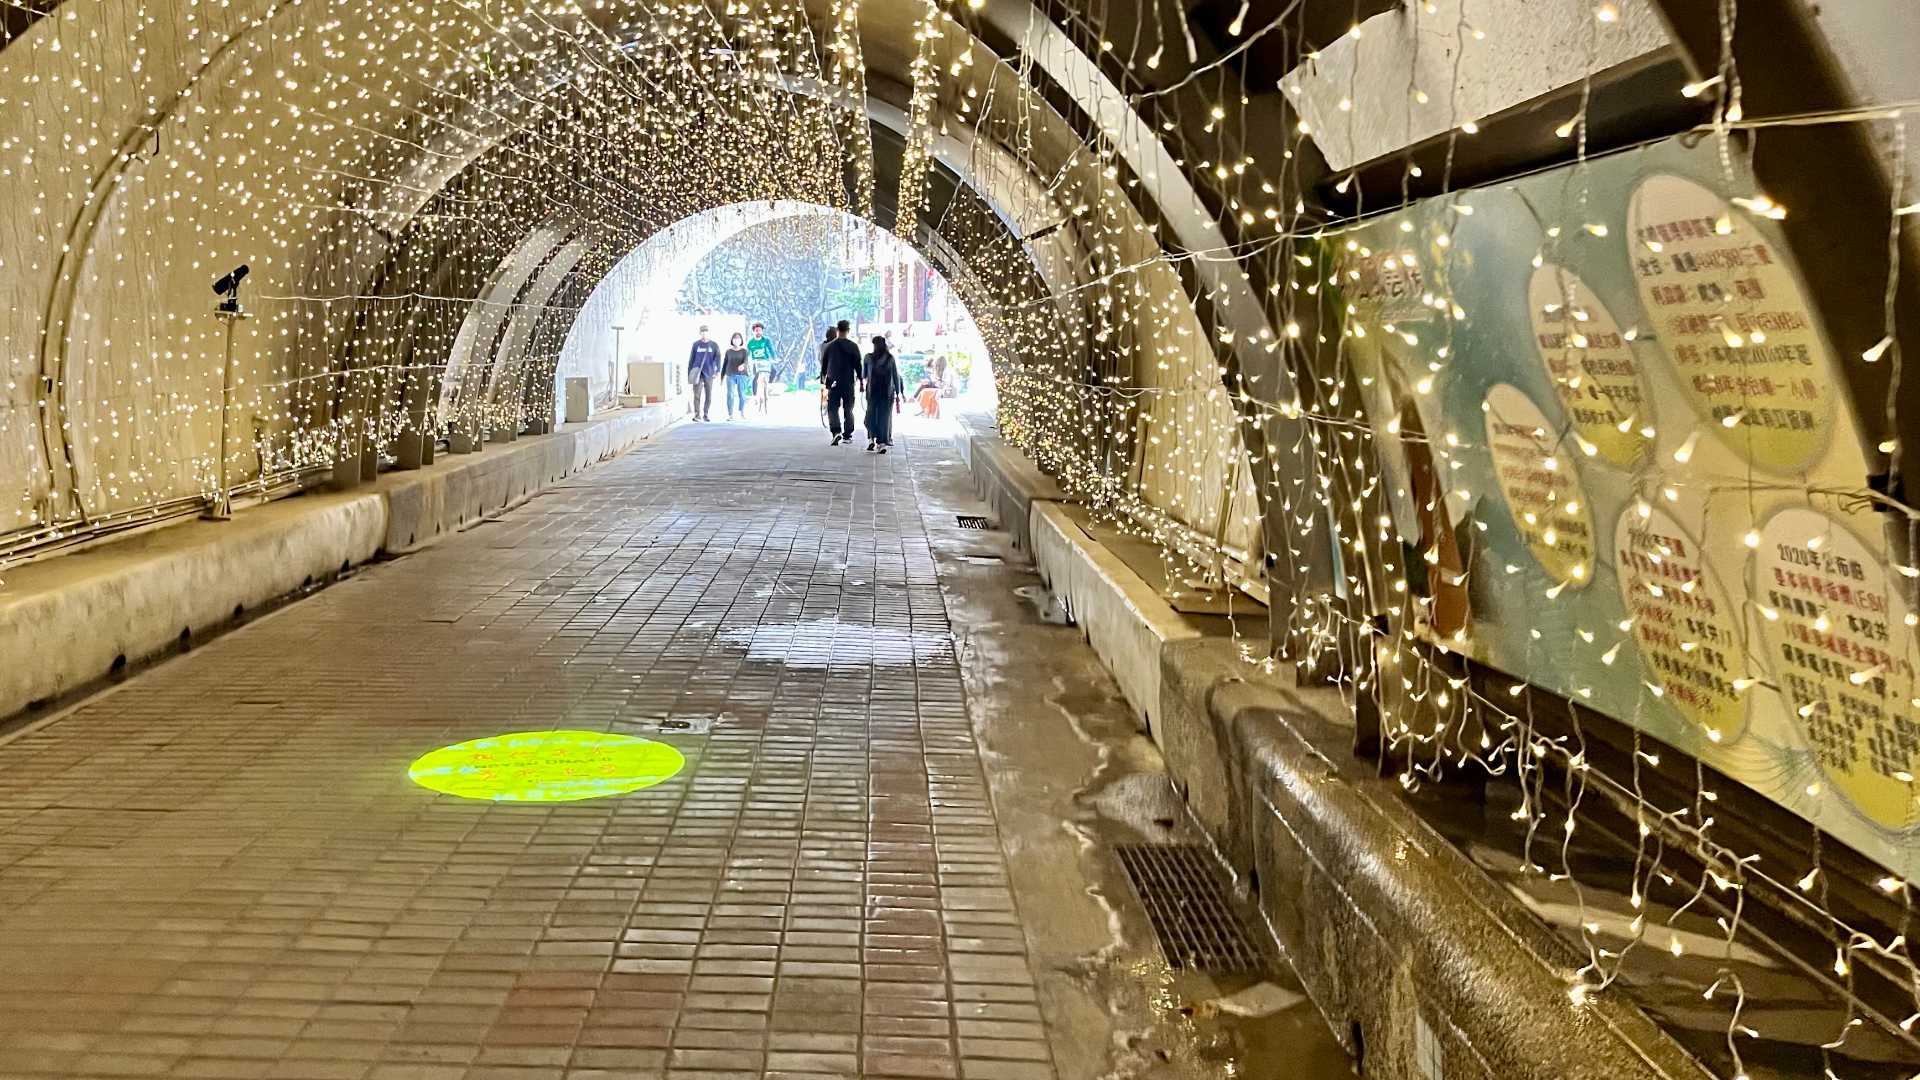 Thousands of fairy lights hanging from the roof and walls of the tunnel, with the tunnel exit visible in the near-distance.